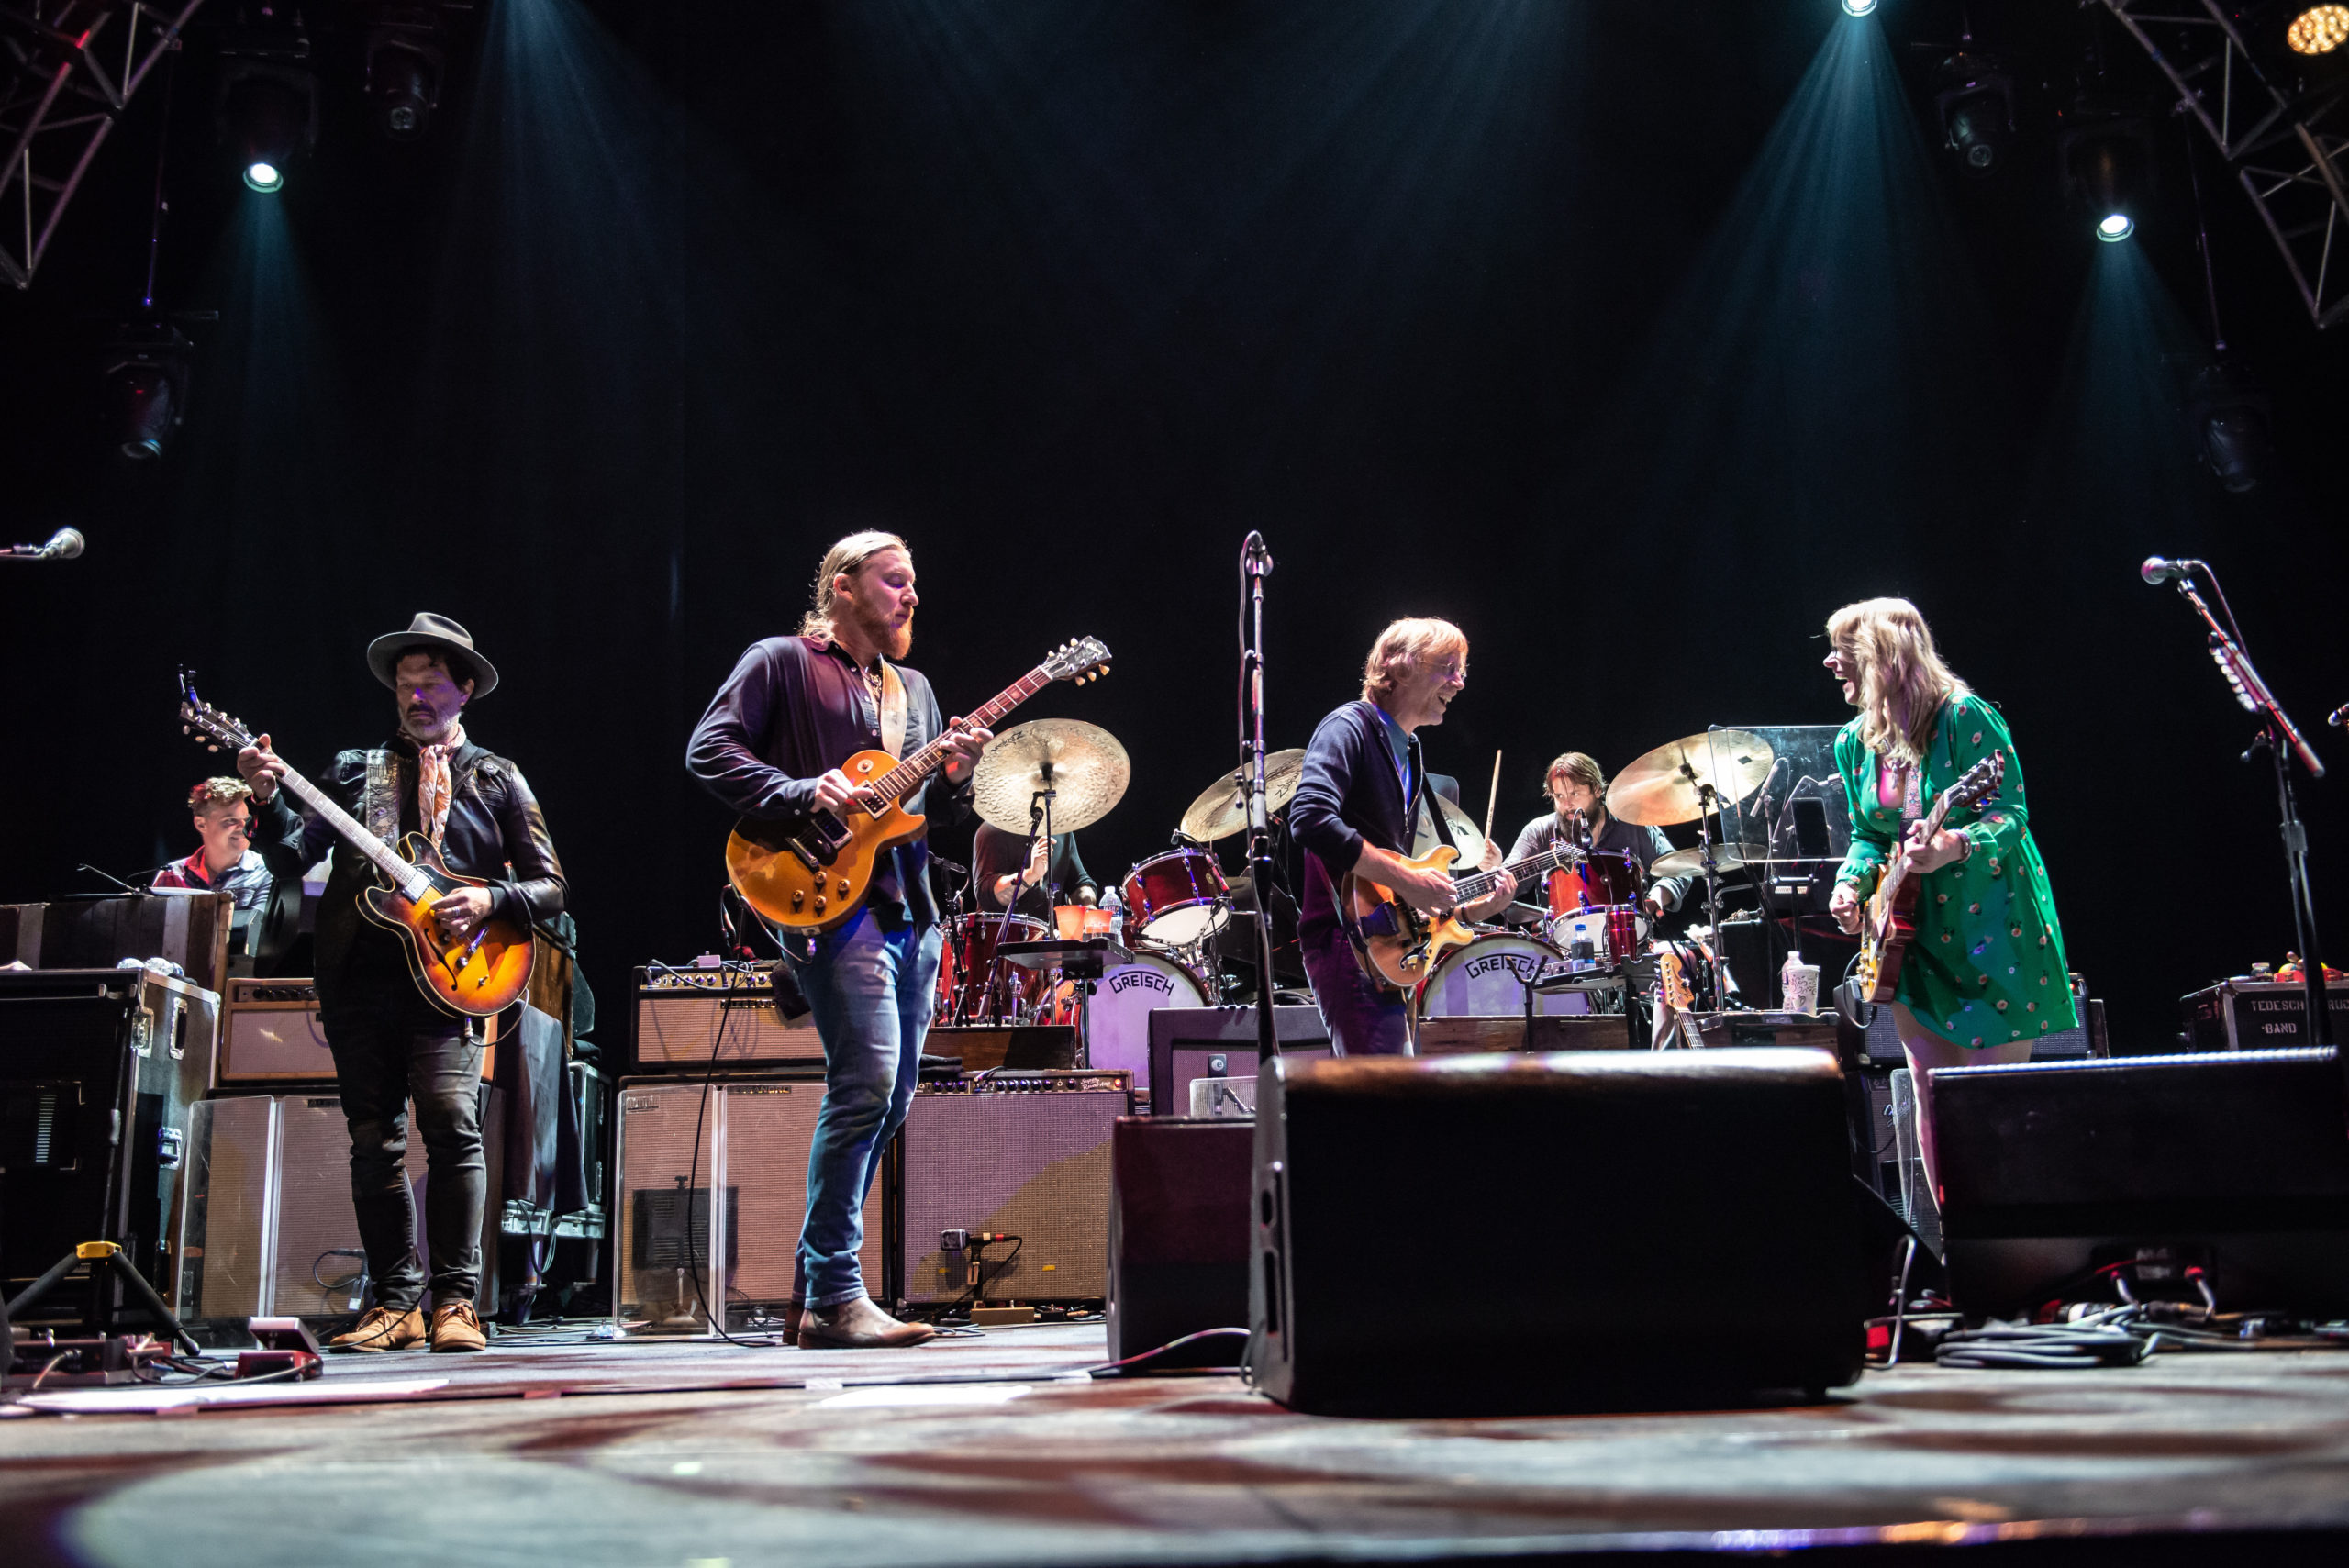 Watch: Tedeschi Trucks Band Share “Nobody Knows You When You’re Down And Out” From ‘Layla Revisited’ Feat. Trey Anastasio and Doyle Bramhall II